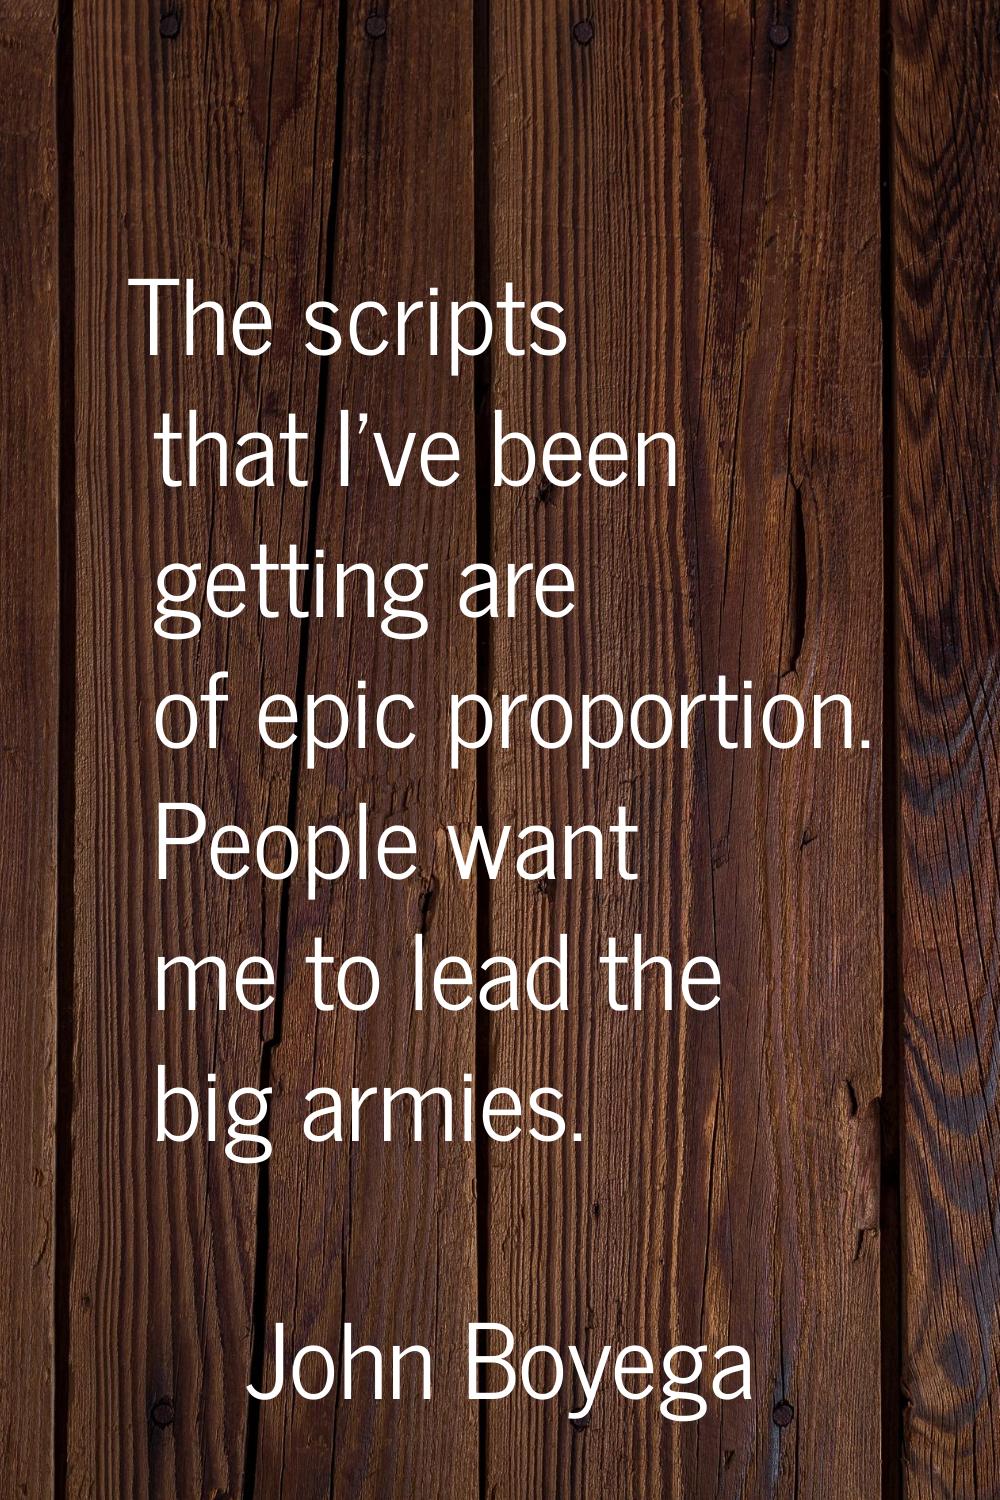 The scripts that I've been getting are of epic proportion. People want me to lead the big armies.